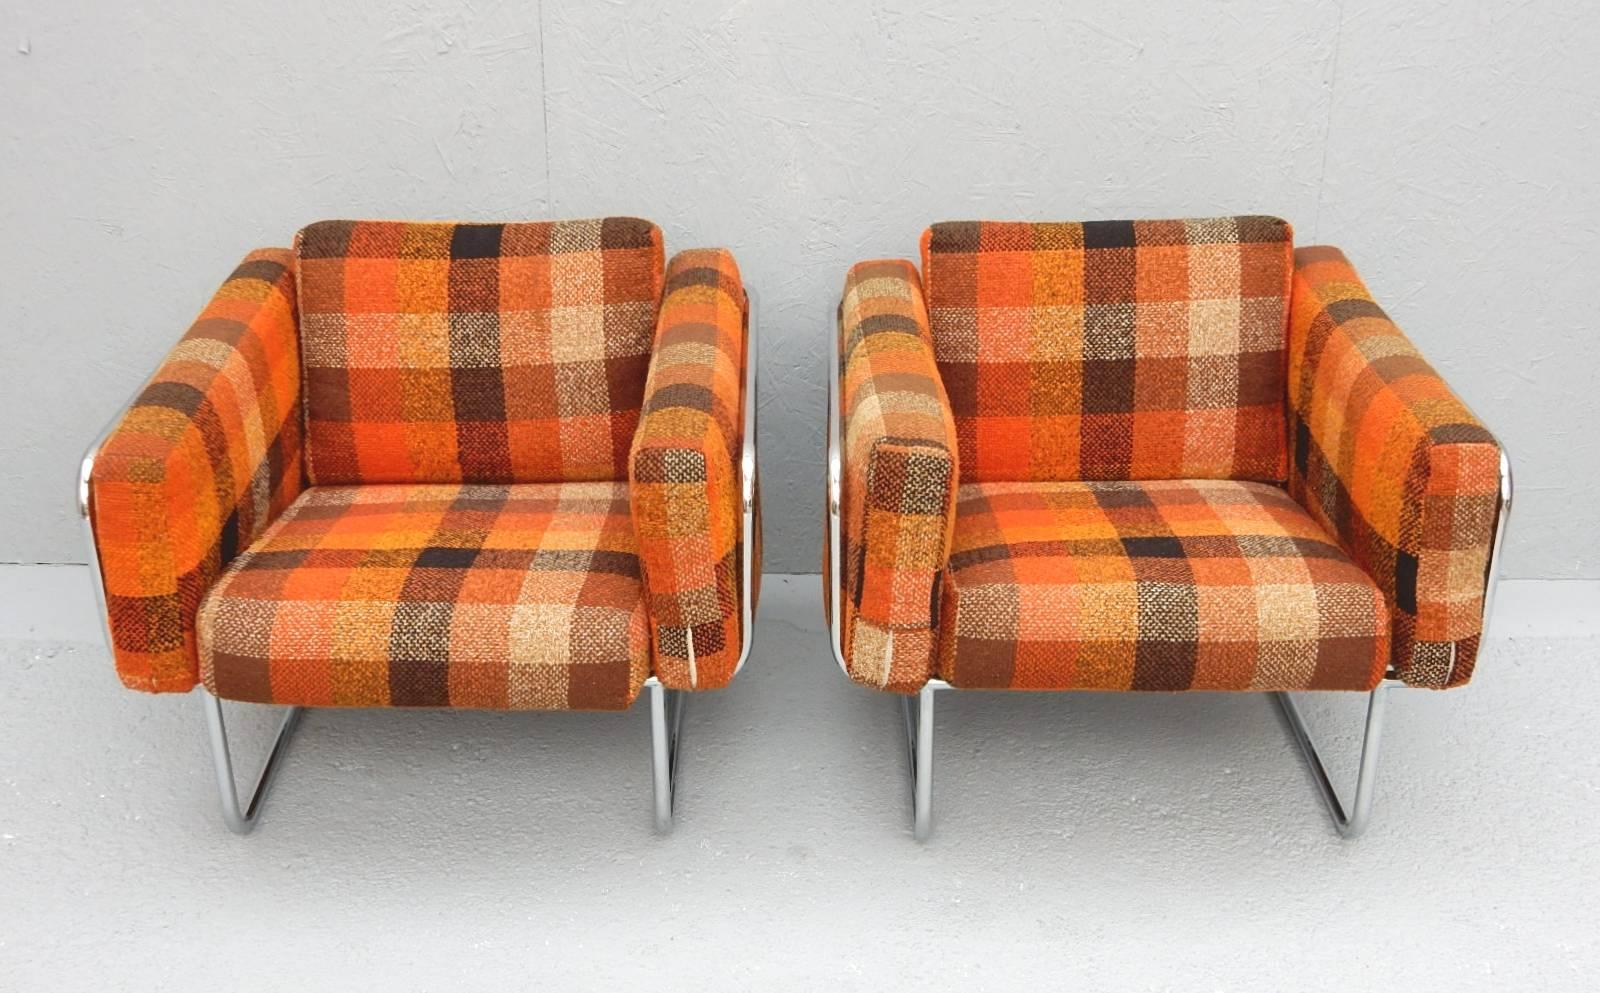 Tubular chrome lounge chairs designed by Hans Eichenberger of Denmark, circa 1960.
Gorgeous original fat plaid wool upholstery in bold bright colors.
Very comfortable chairs.
 